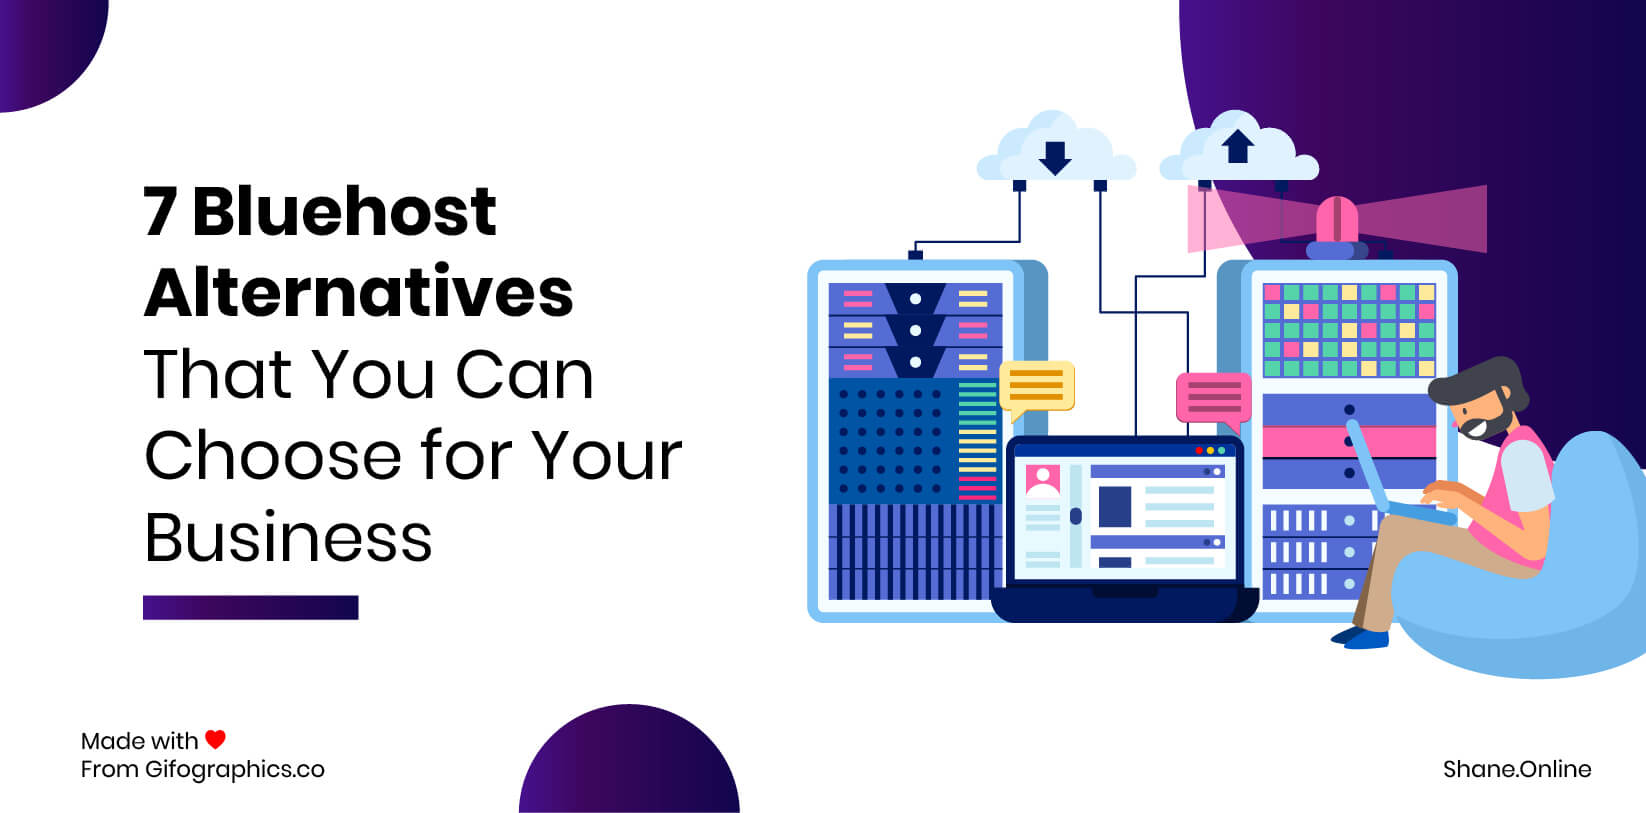 7 Bluehost Alternatives That You Can Choose for Your Business